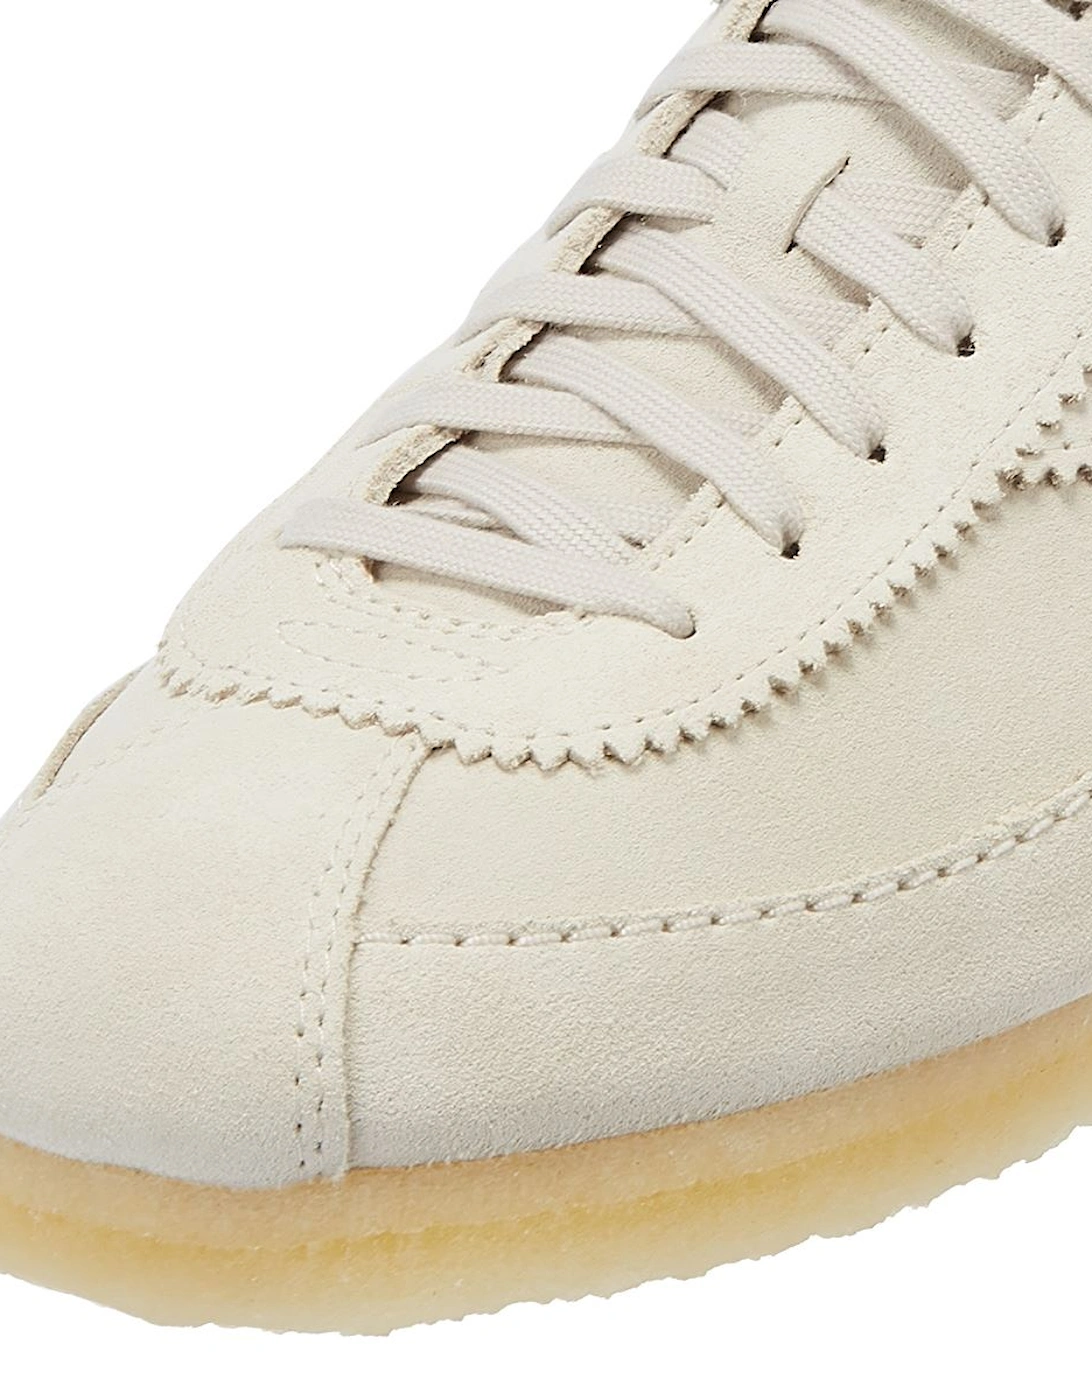 Originals Wallabee Tor Suede Men's Off White Lace-Up Shoes